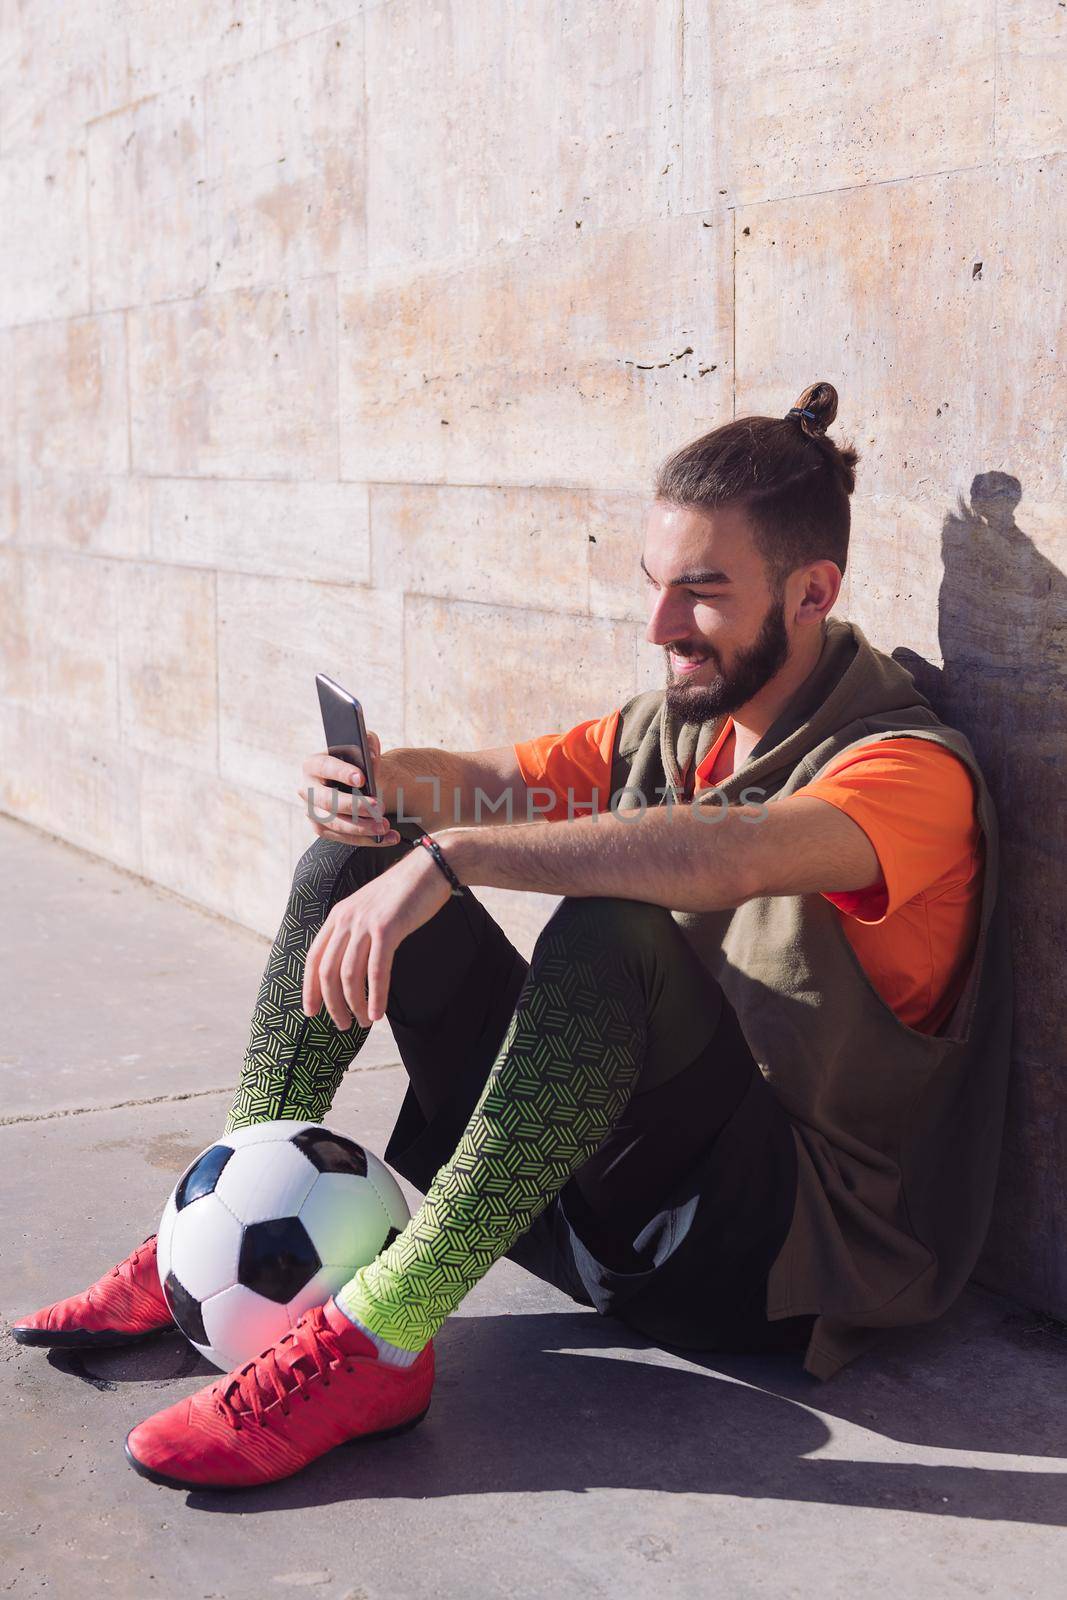 soccer player rest consulting his mobile phone by raulmelldo